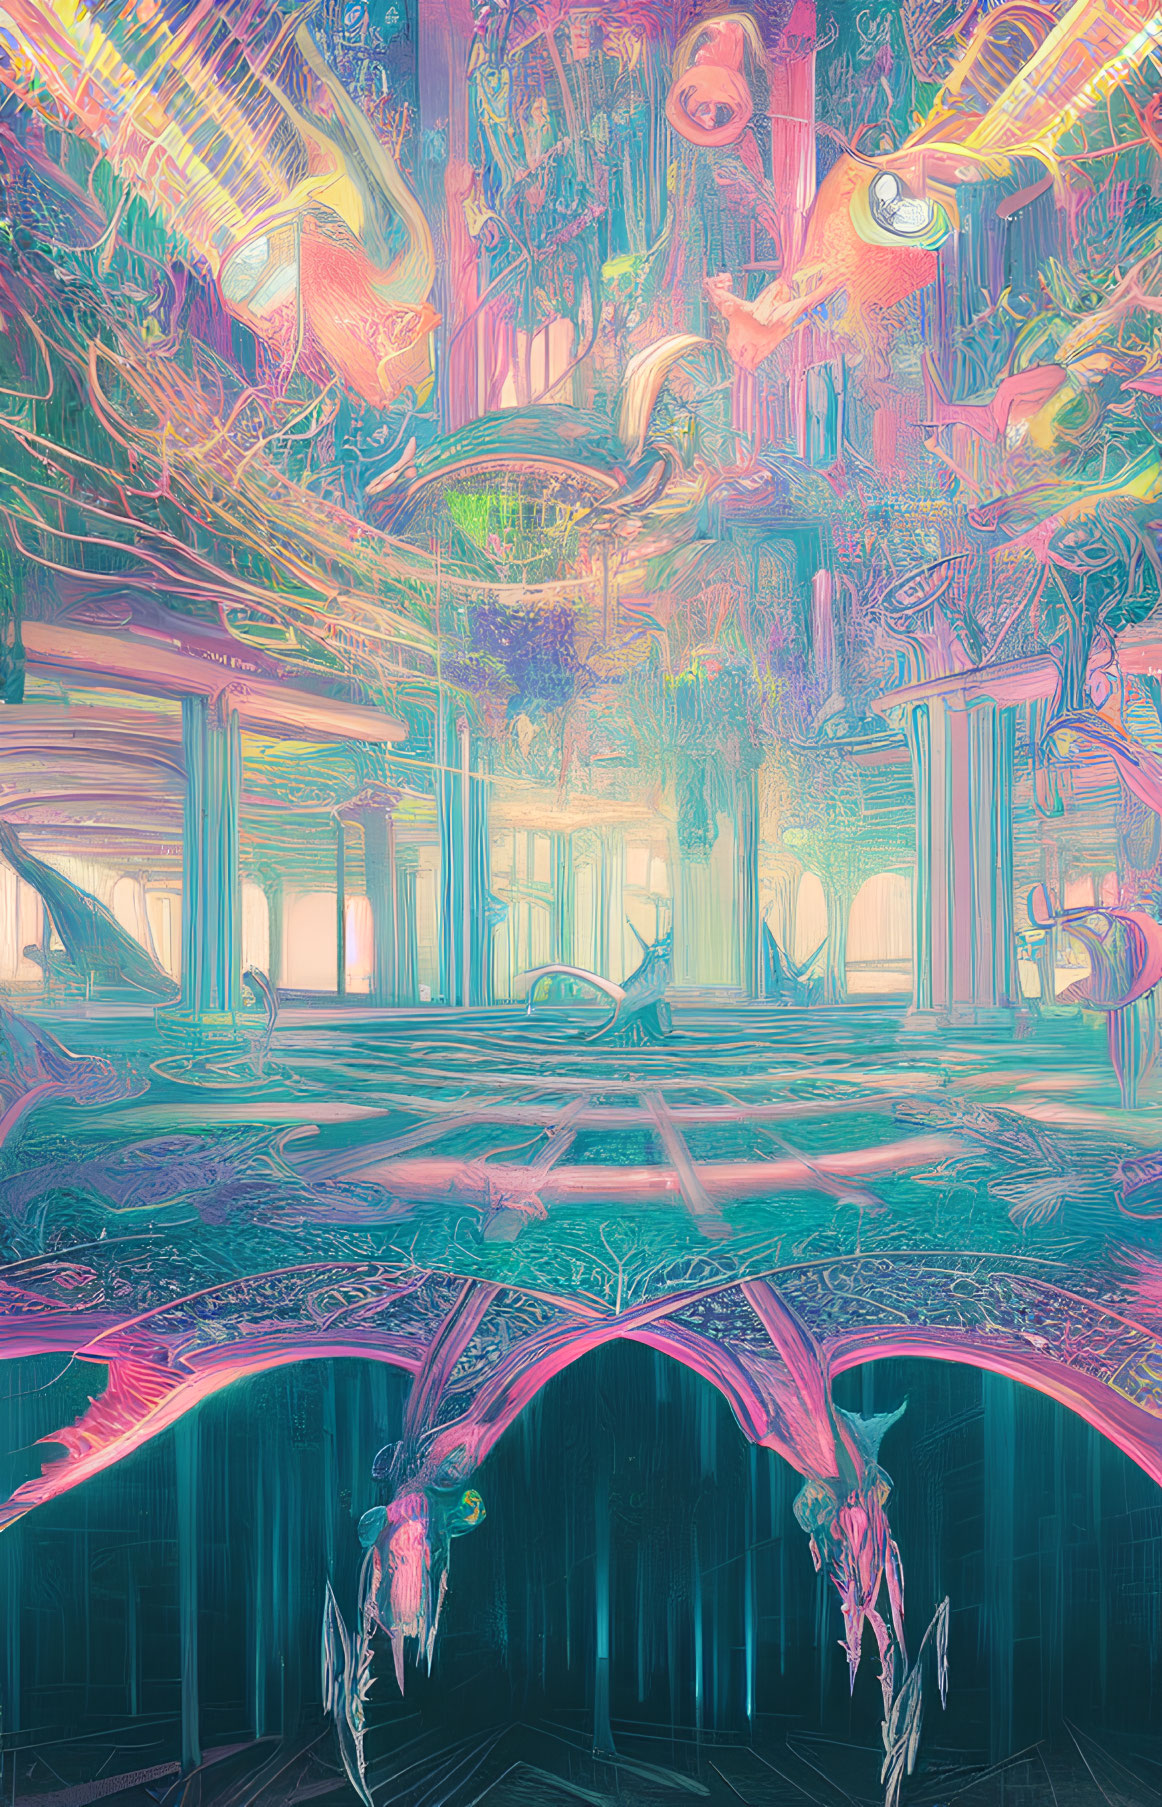 Colorful Psychedelic Art: Classical Architecture with Surreal Flamingo Motif